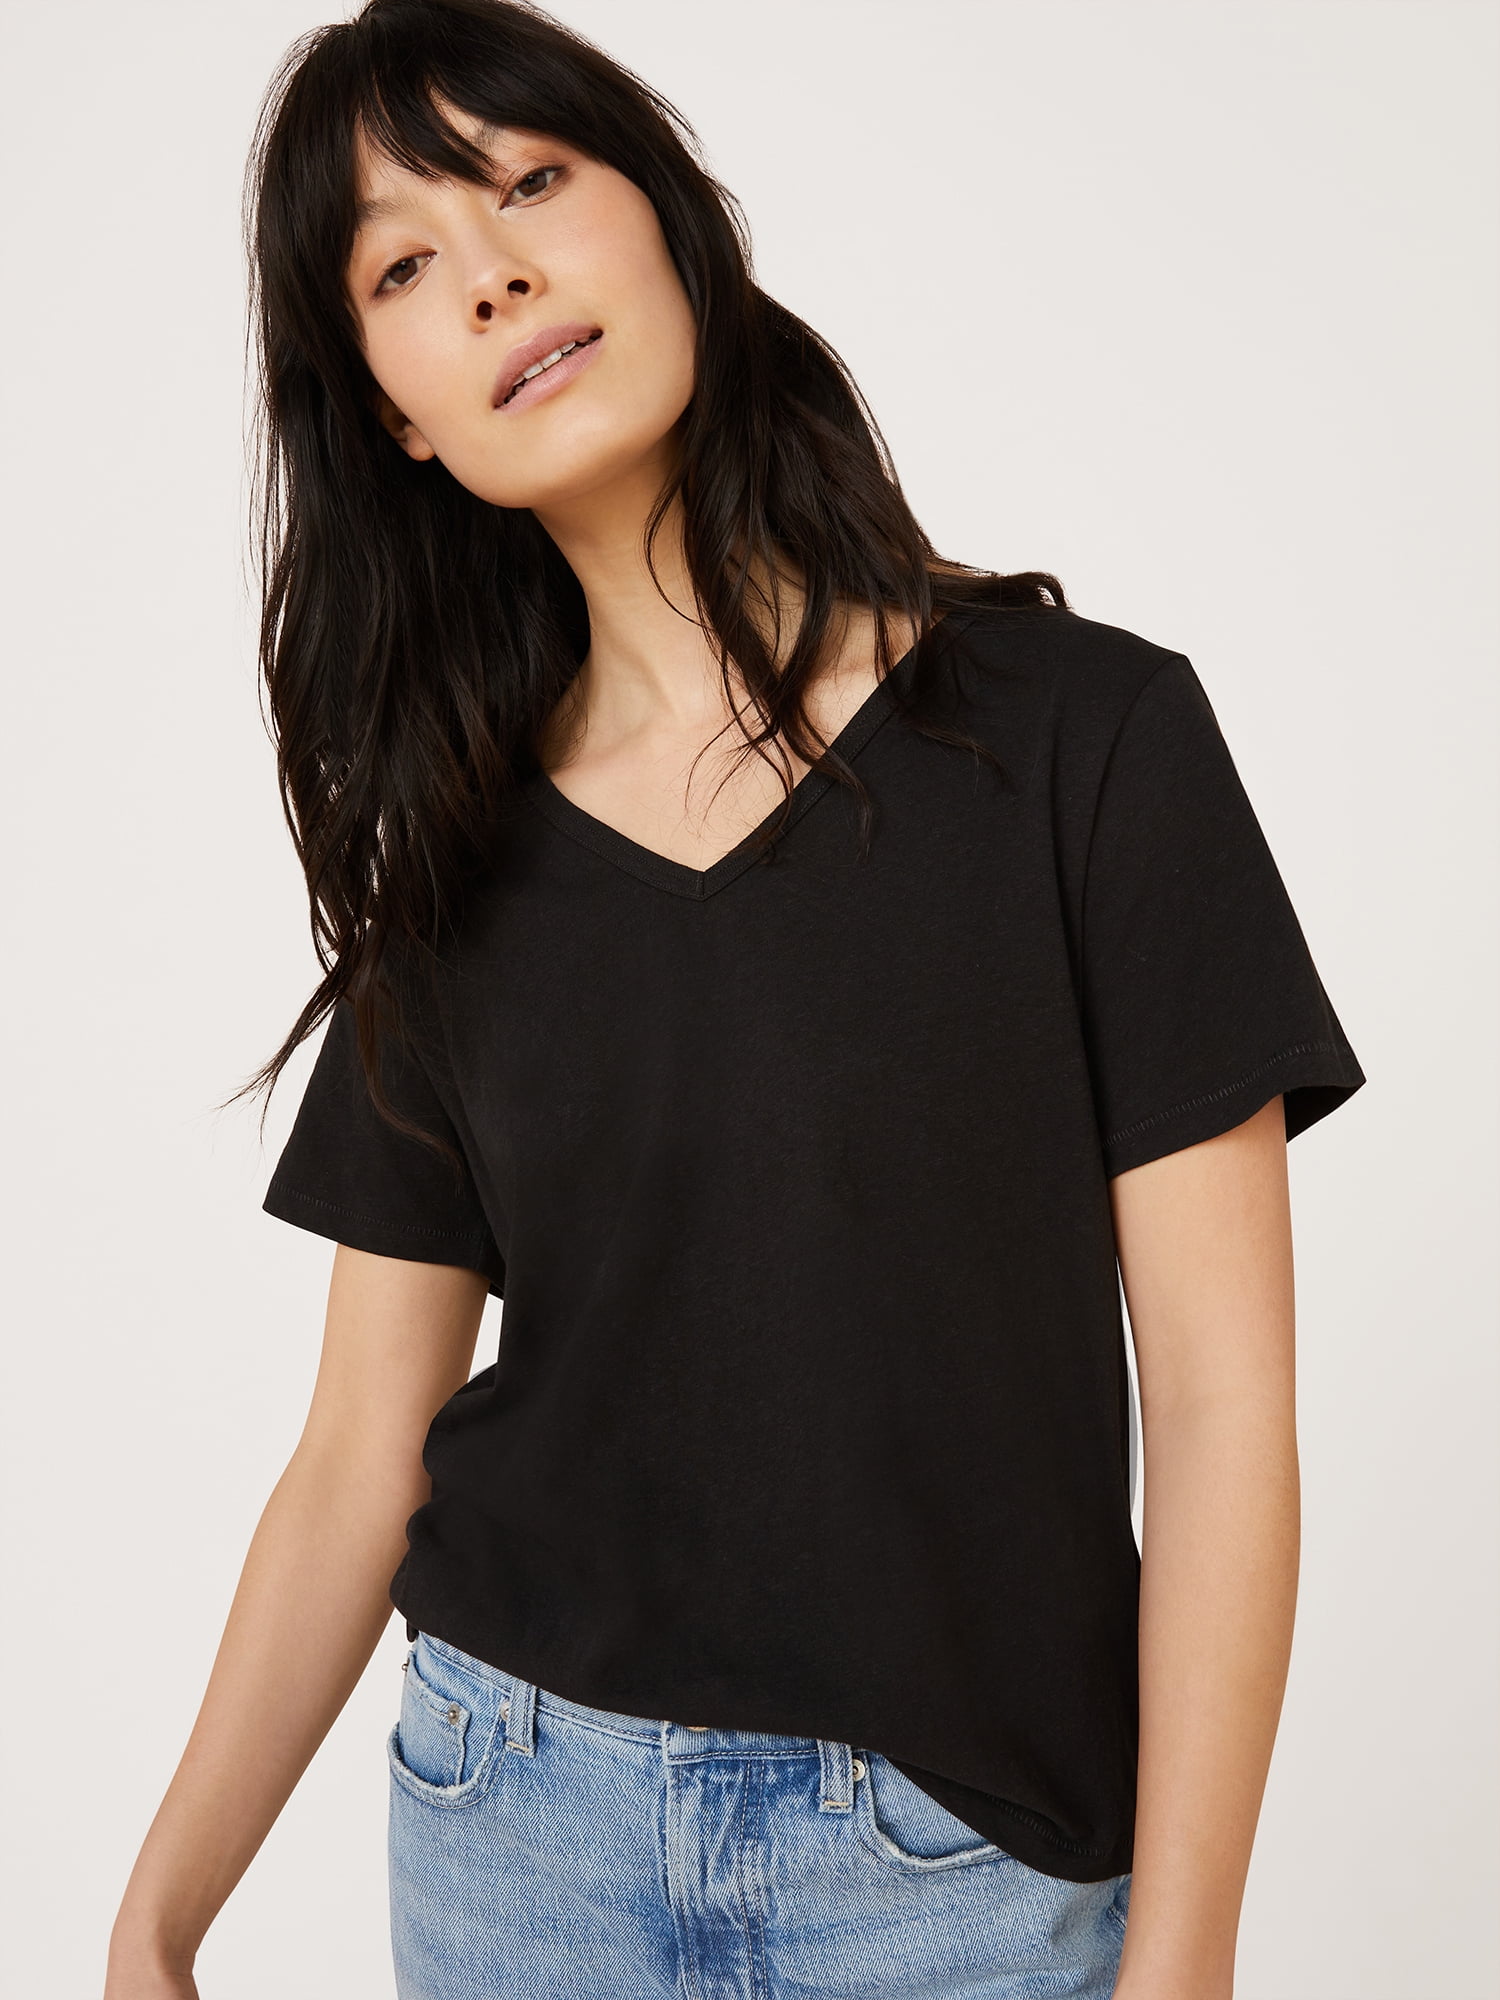 Free Assembly Women’s V-Neck T-Shirt with Short Sleeves - Walmart.com